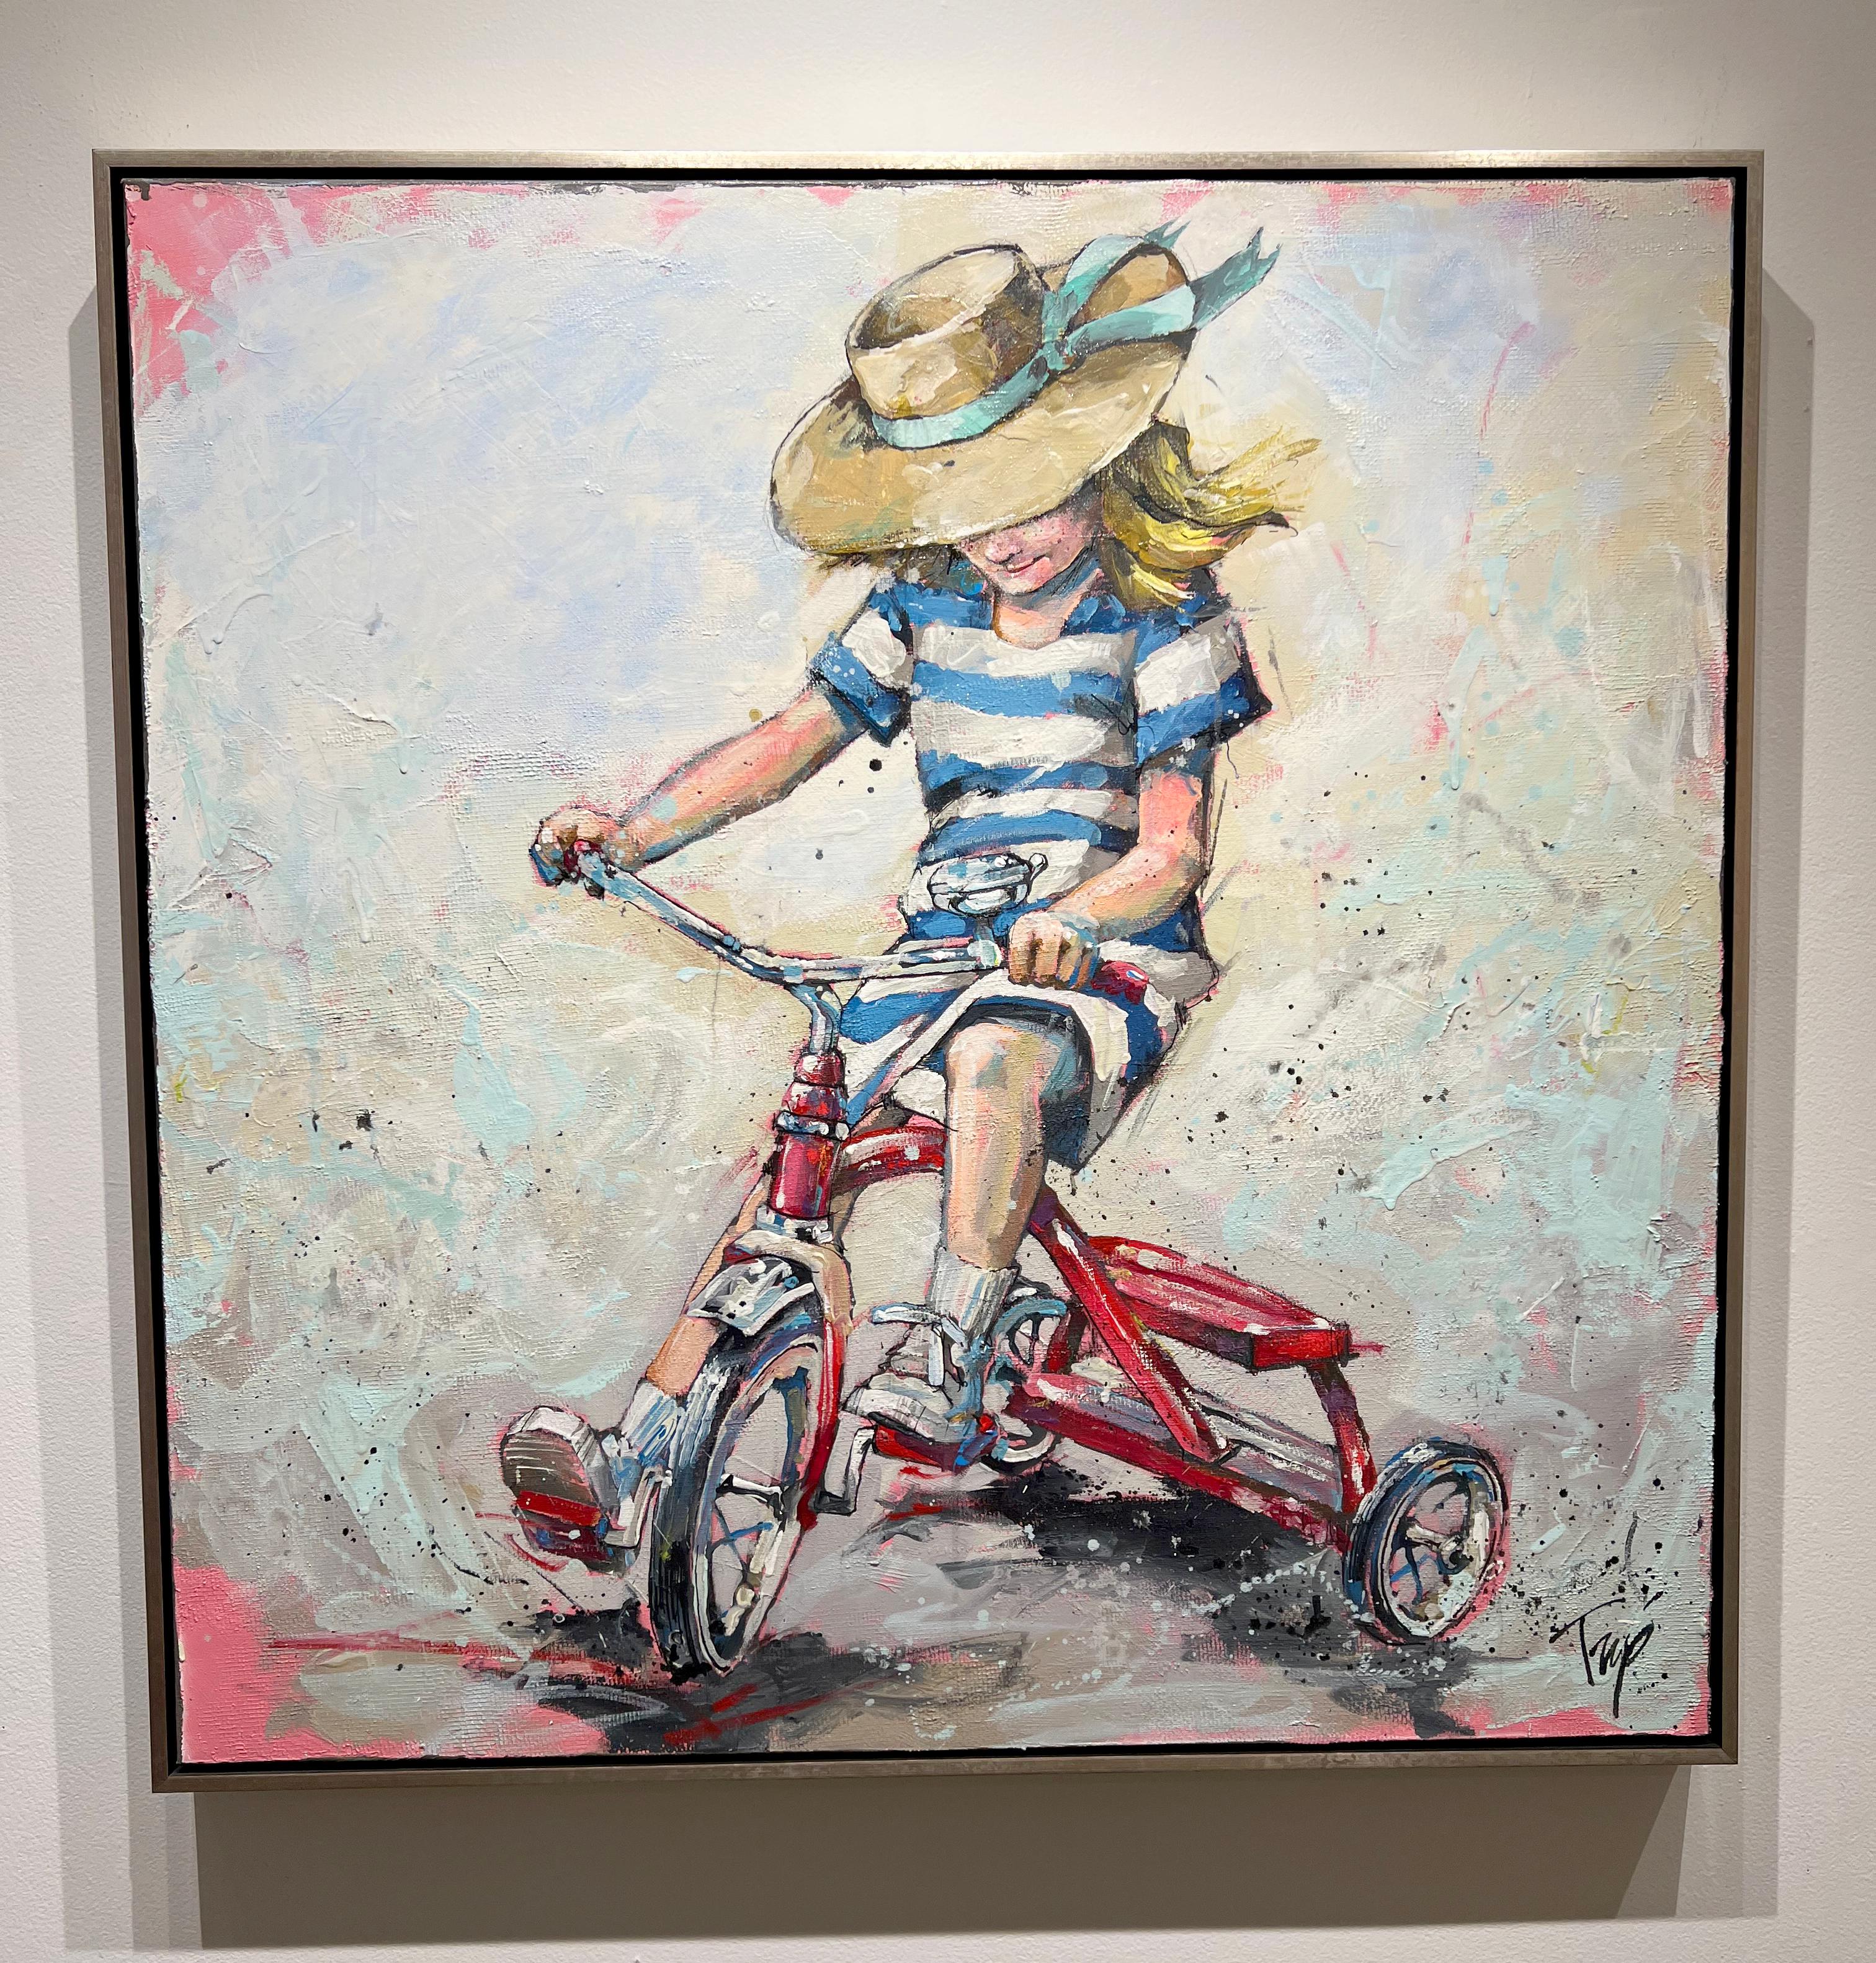 Trip Park - Park, "Dream Ride", 40x40 Whimsical Tricycle Girl Oil Painting  on Canvas For Sale at 1stDibs